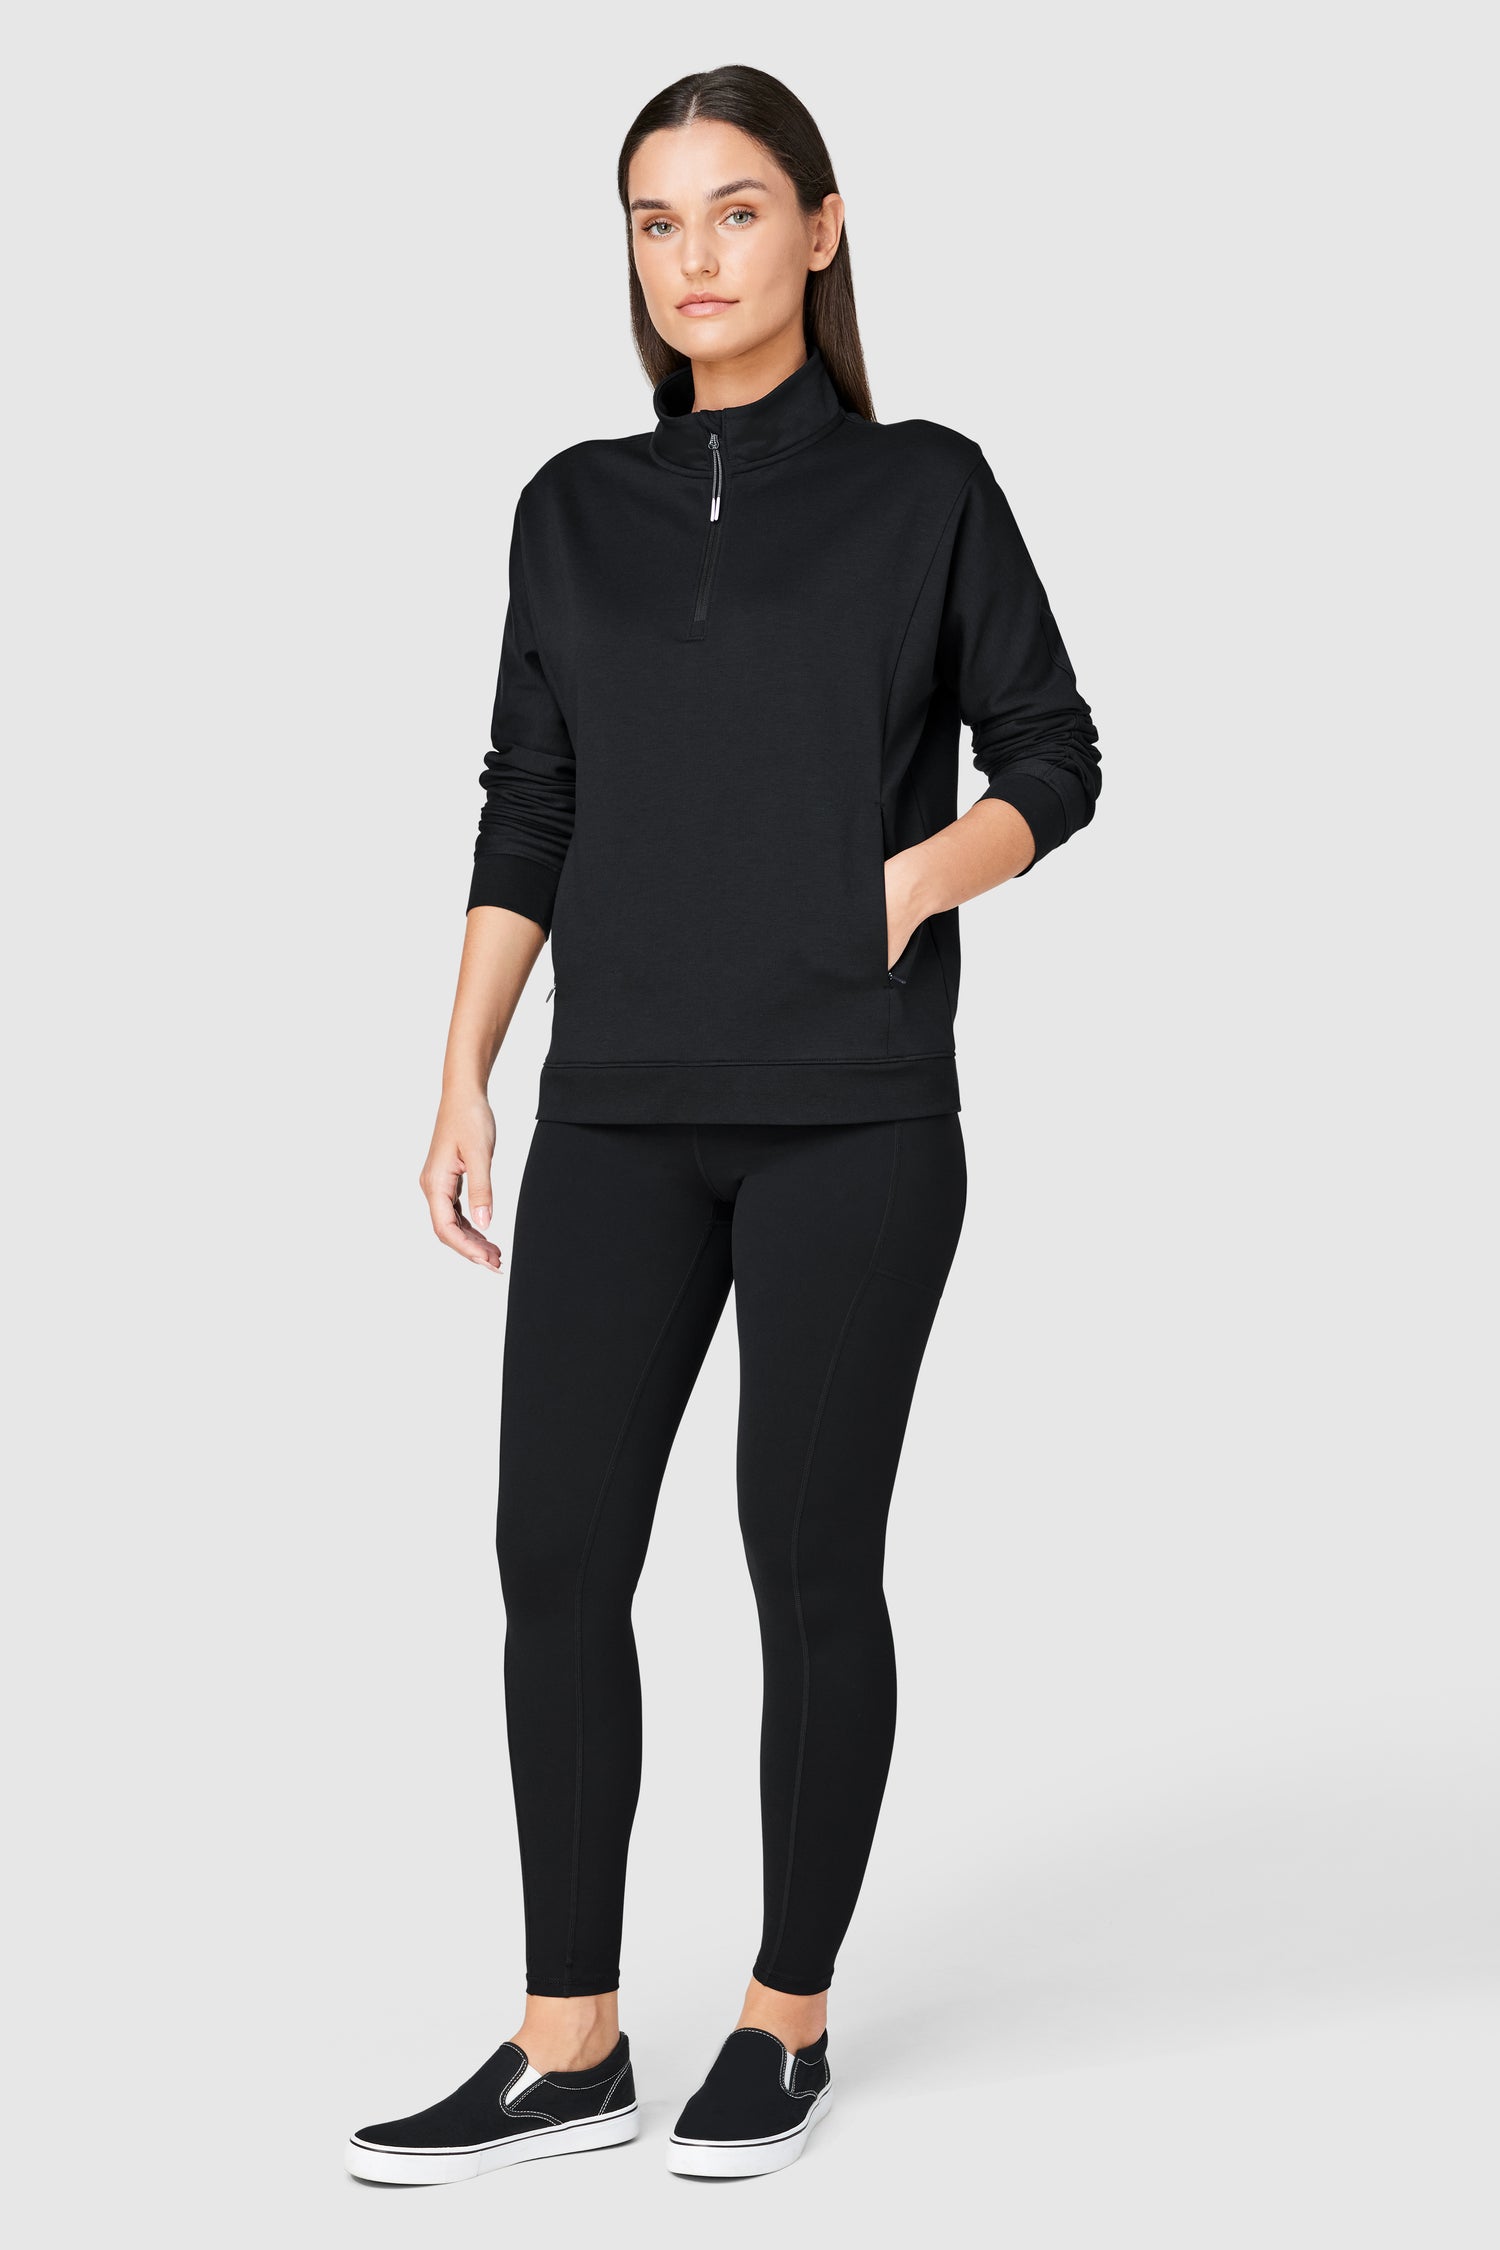 Friday FWD Women's The Everyday Legging - BEST SELLING